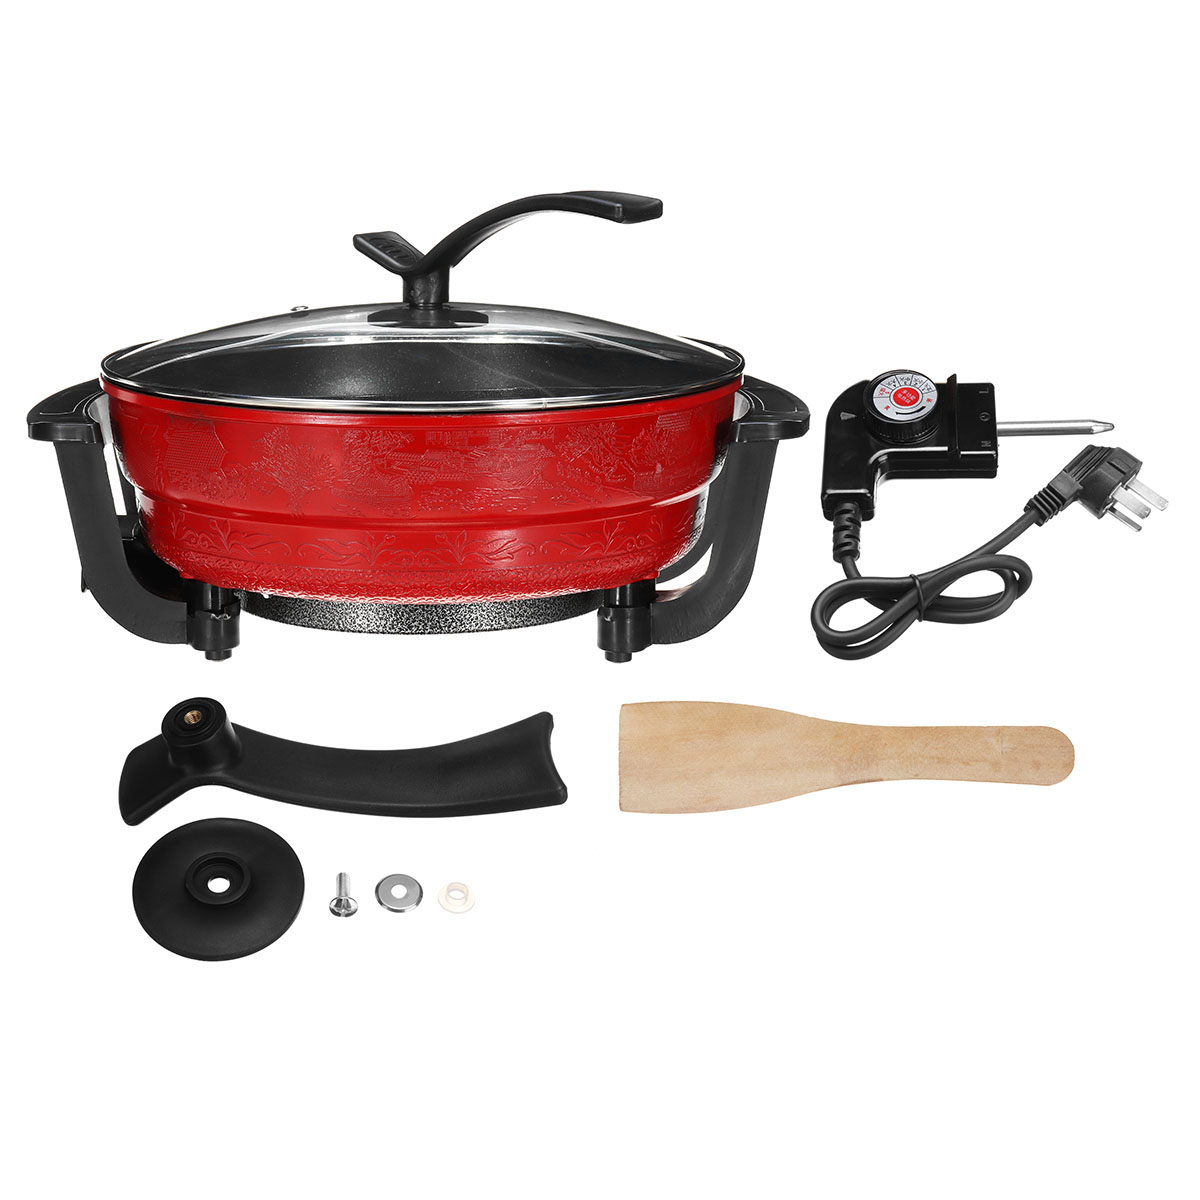 220V 1300W 6L Electric Hot Pot 32cm Kitchen Soup Stock Pot Cookware Non-stick For Induction Cookers Cooking Pot